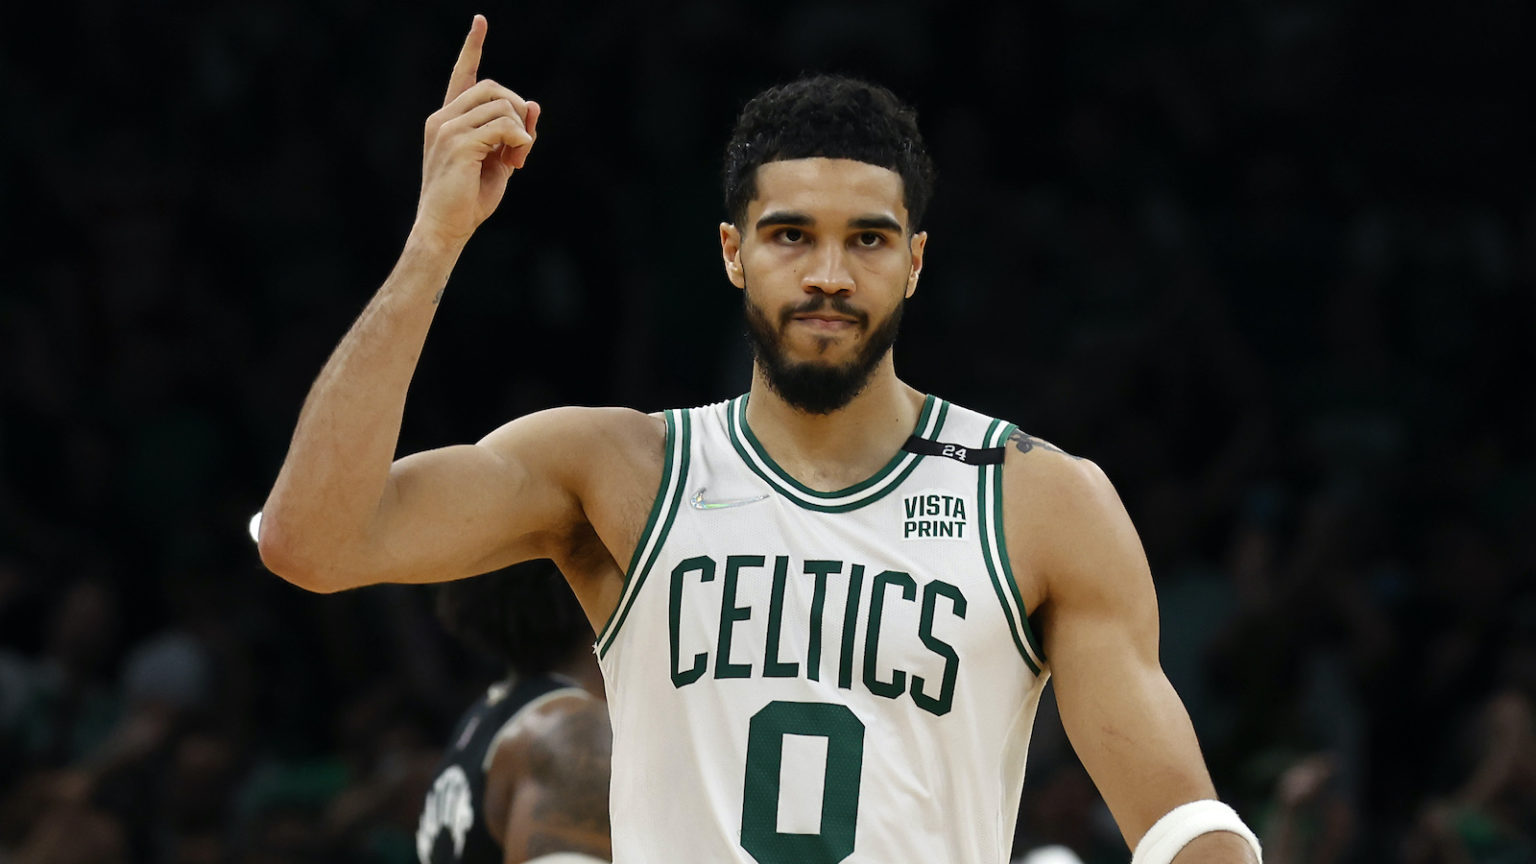 Jayson Tatum reveals he played through significant injury during playoffs